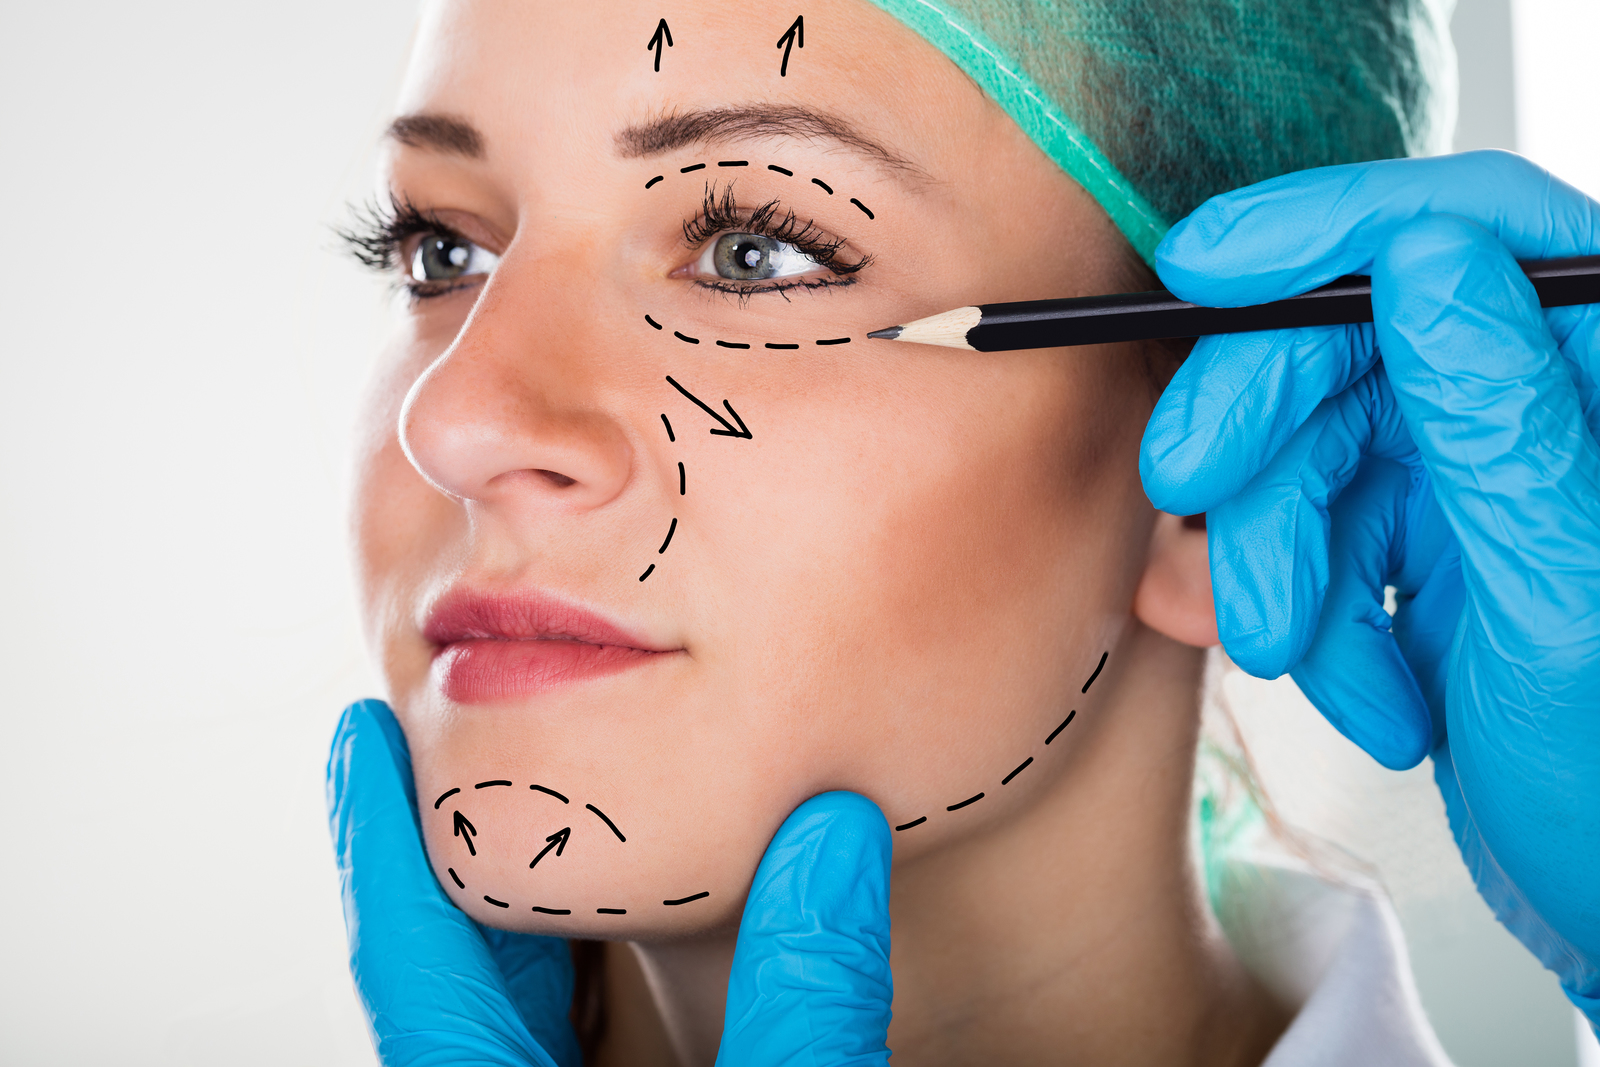 Demand For Facial Aesthetics On The Rise Despite Fall In Surgical